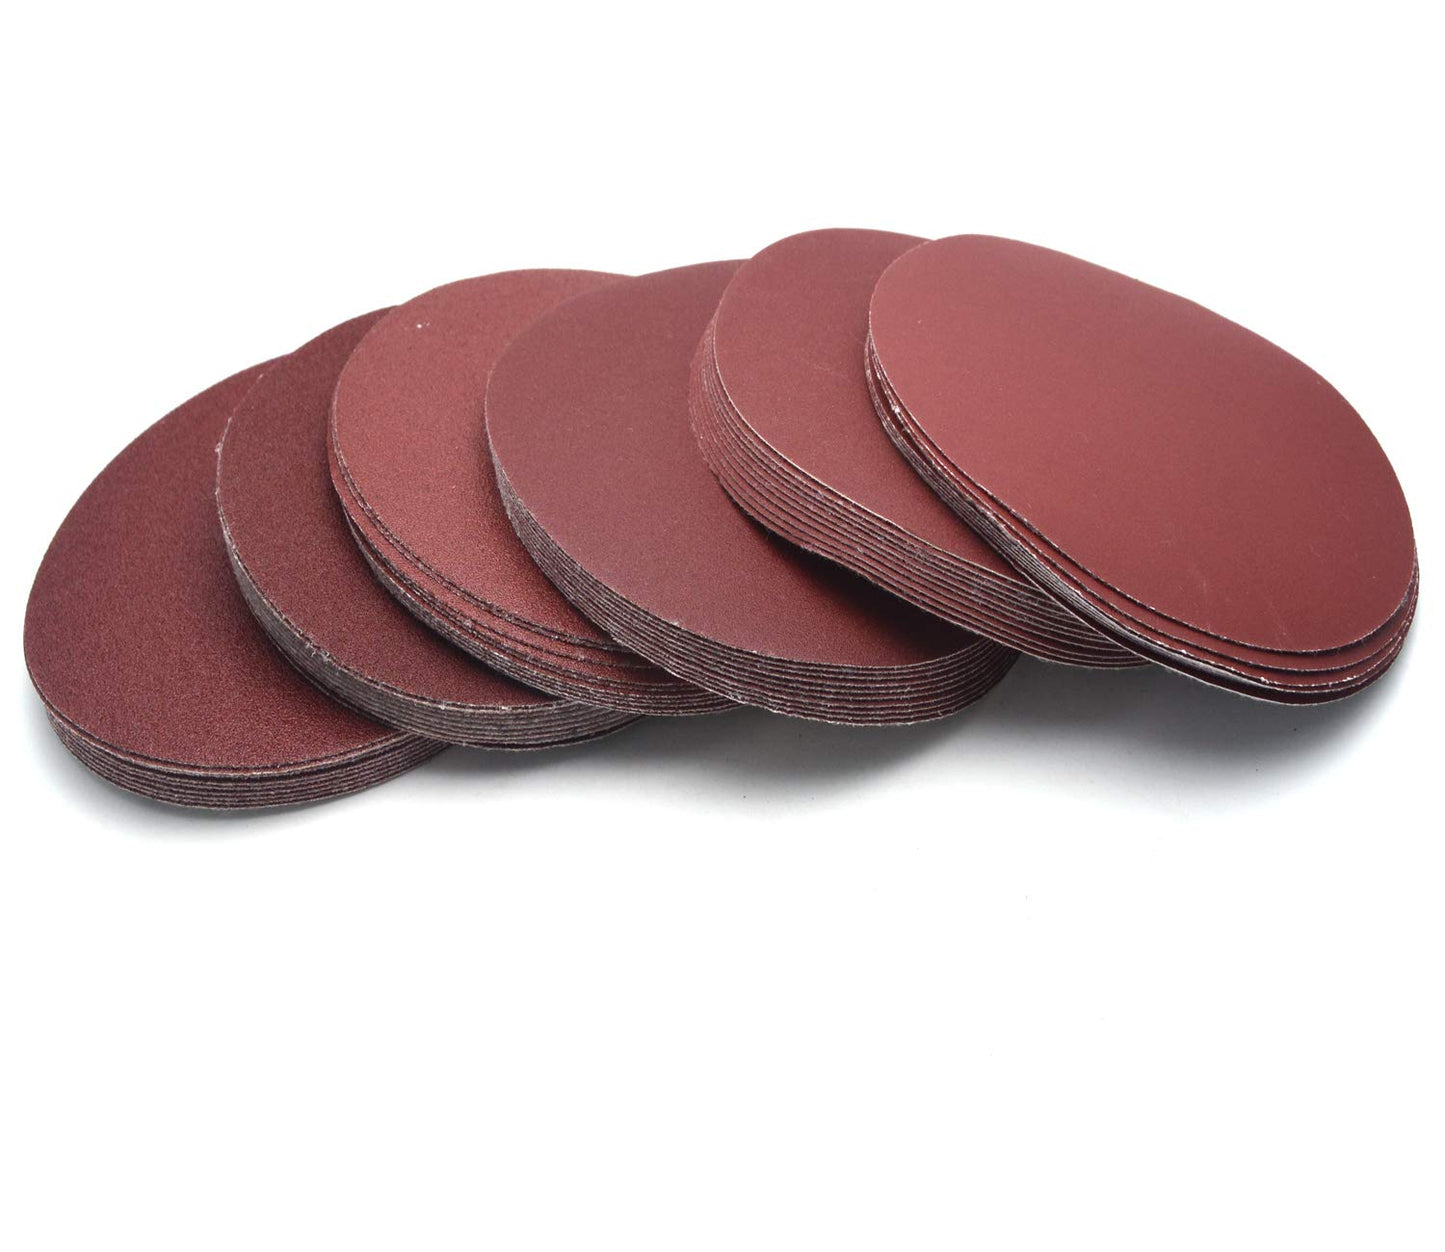 findmall 60Pcs Hook and Loop Sanding Disc 6-Inch No-Hole Aluminum Oxide Sandpaper Include 80 100 120 180 240 400 Grits Fit for Sanding Grinder Polishing Accessories FINDMALLPARTS